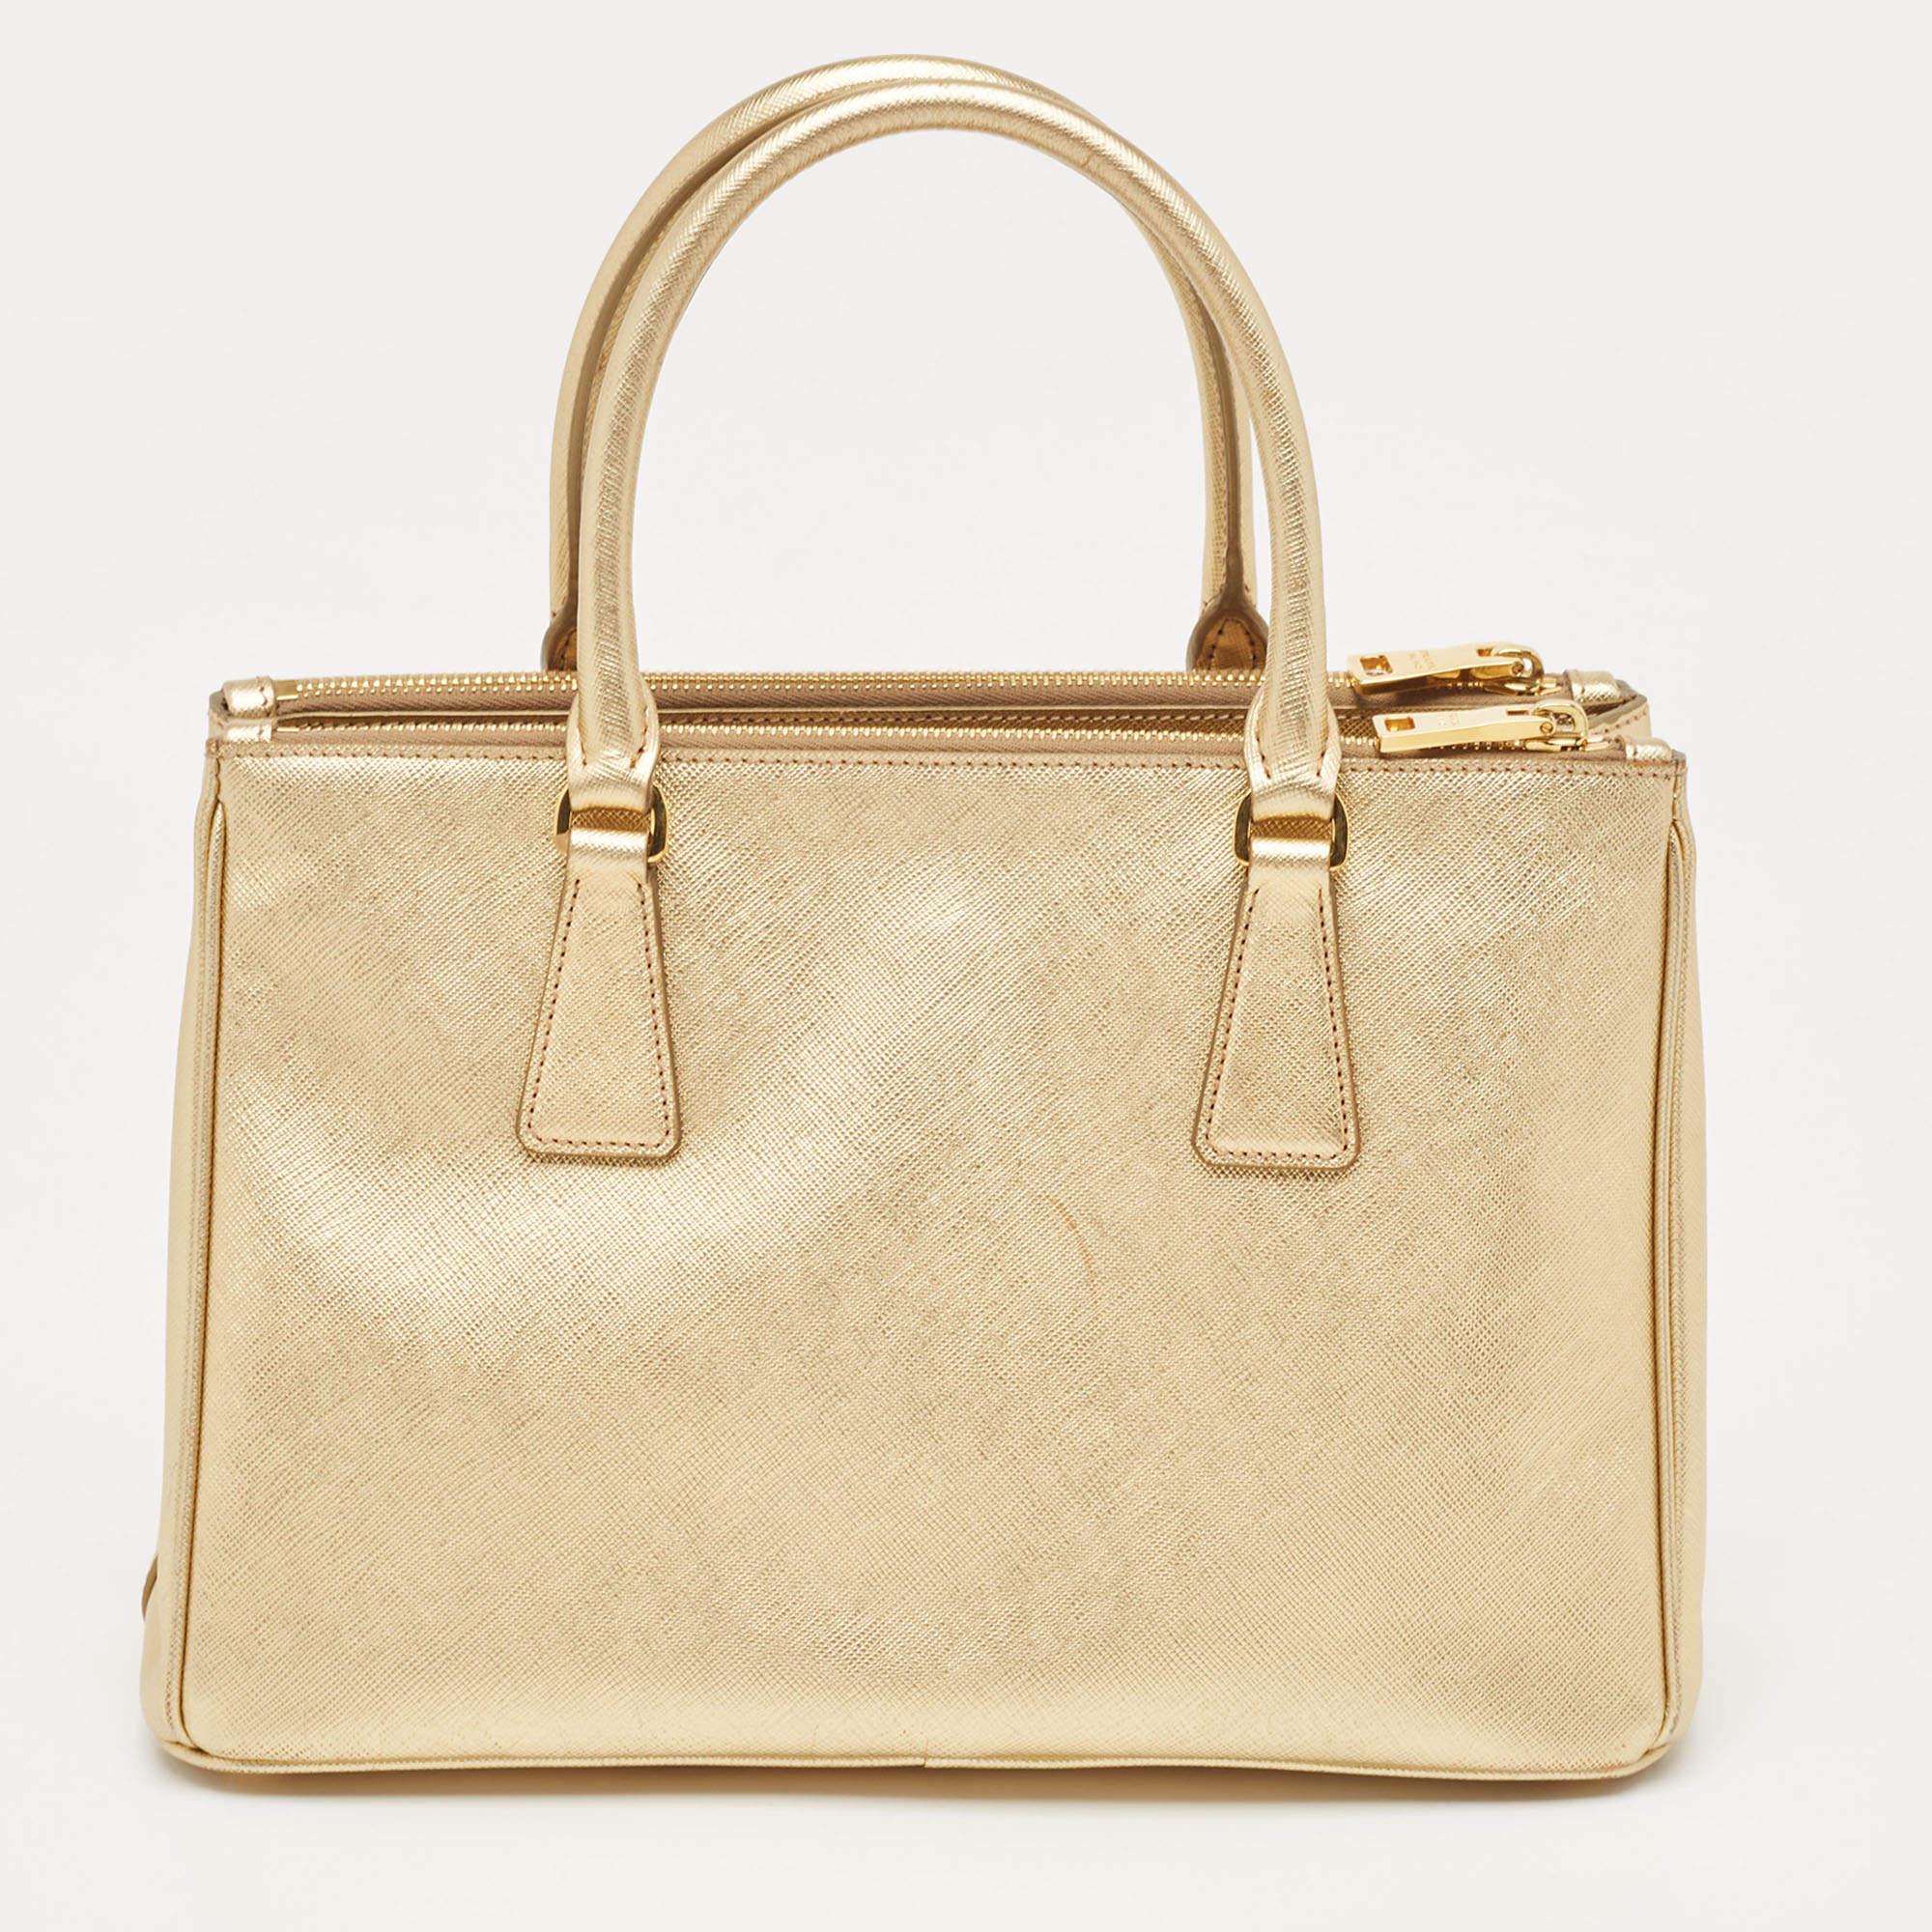 This Prada gold tote is an example of the brand's fine designs that are skillfully crafted to project a classic charm. It is a functional creation with an elevating appeal.

Includes: Authenticity Card, Detachable Strap, Invoice

